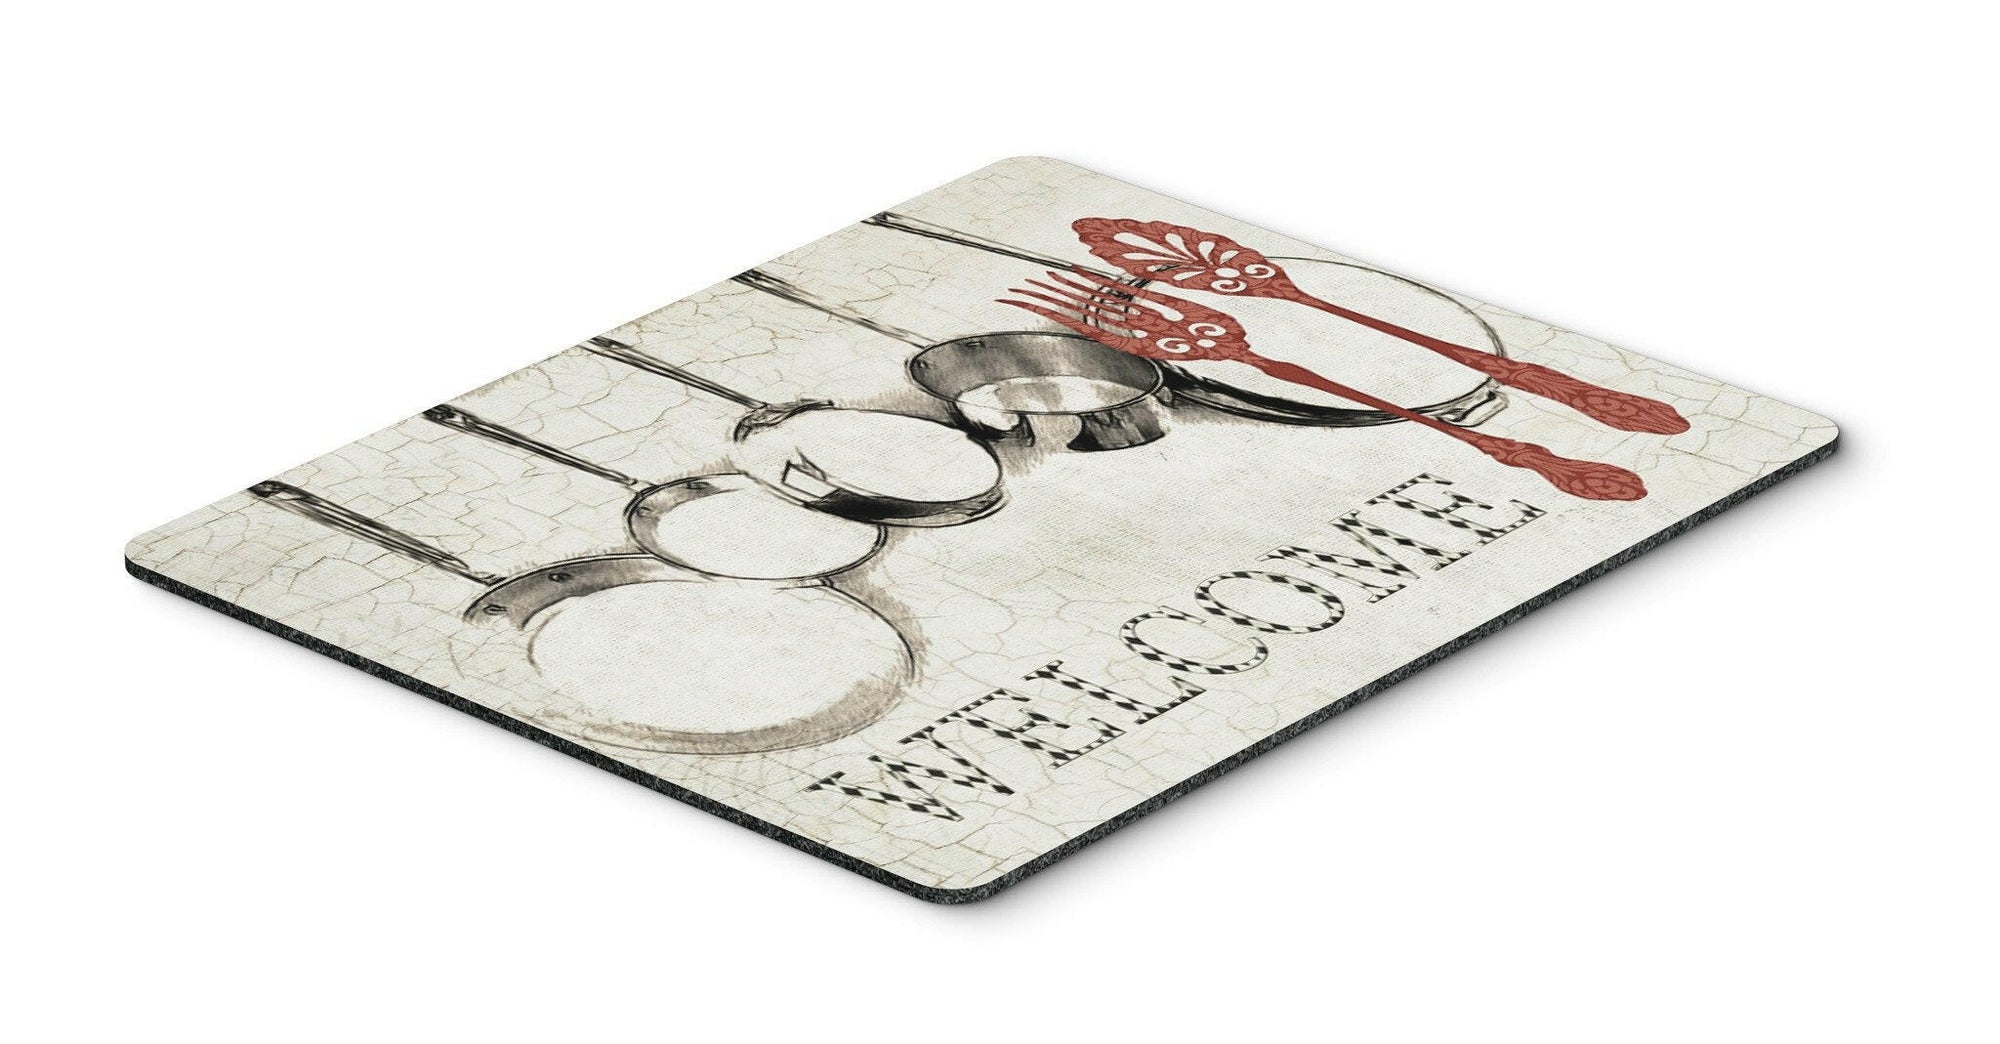 Pots and Pans Welcome Mouse Pad, Hot Pad or Trivet SB3087MP by Caroline's Treasures